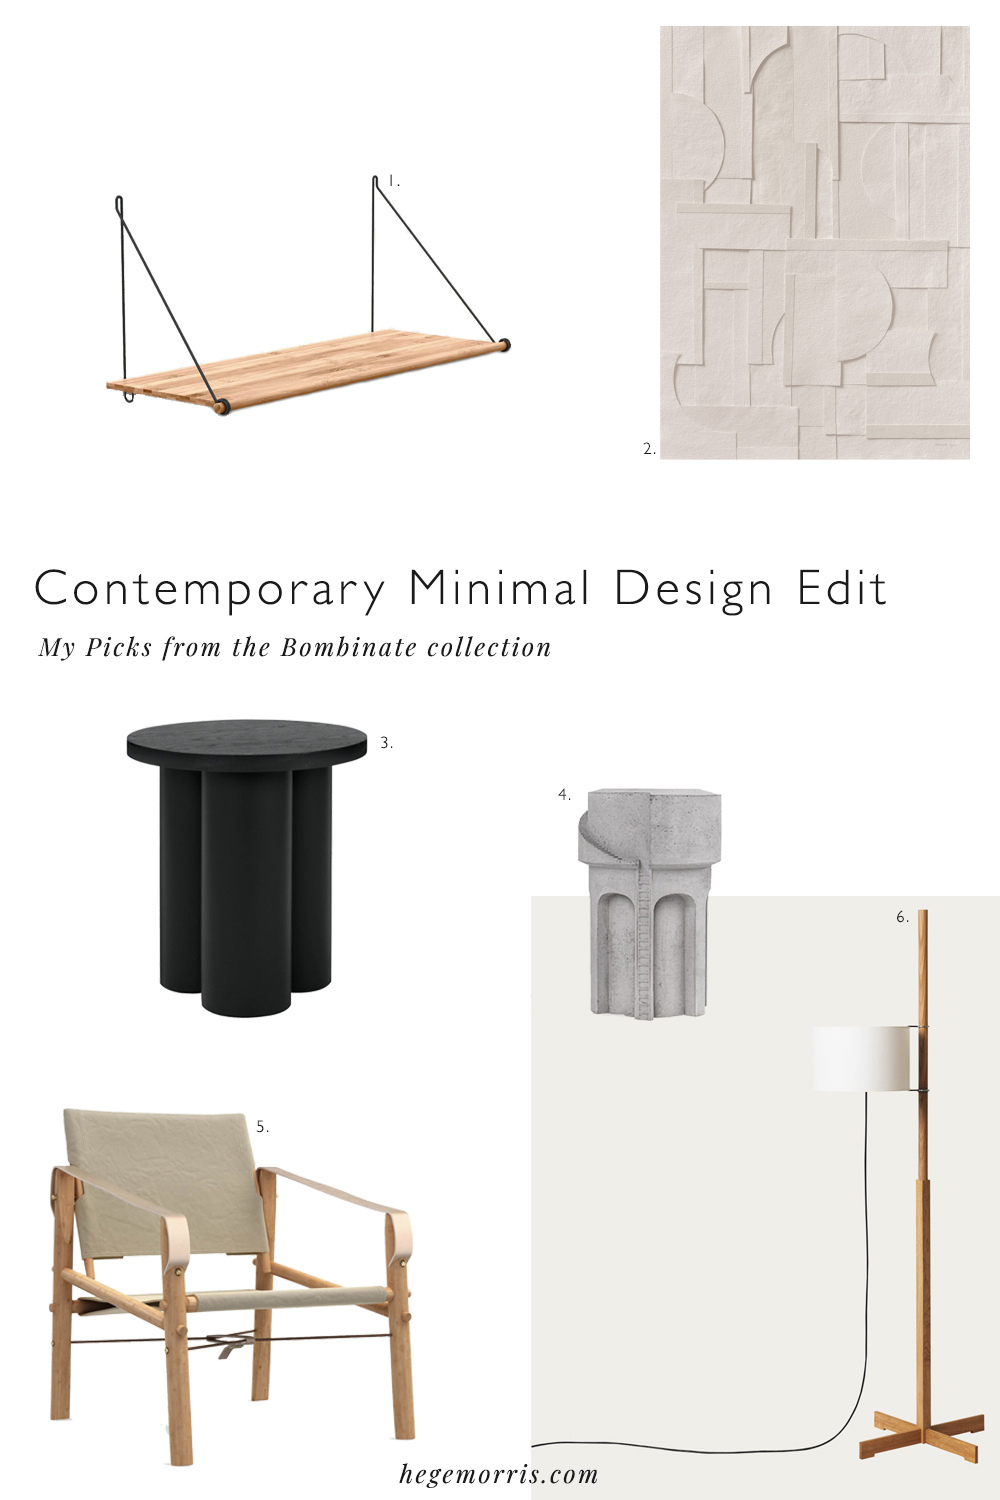 Contemporary Minimal Design Edit from The Bombinate Collection Minimal Nordic Design